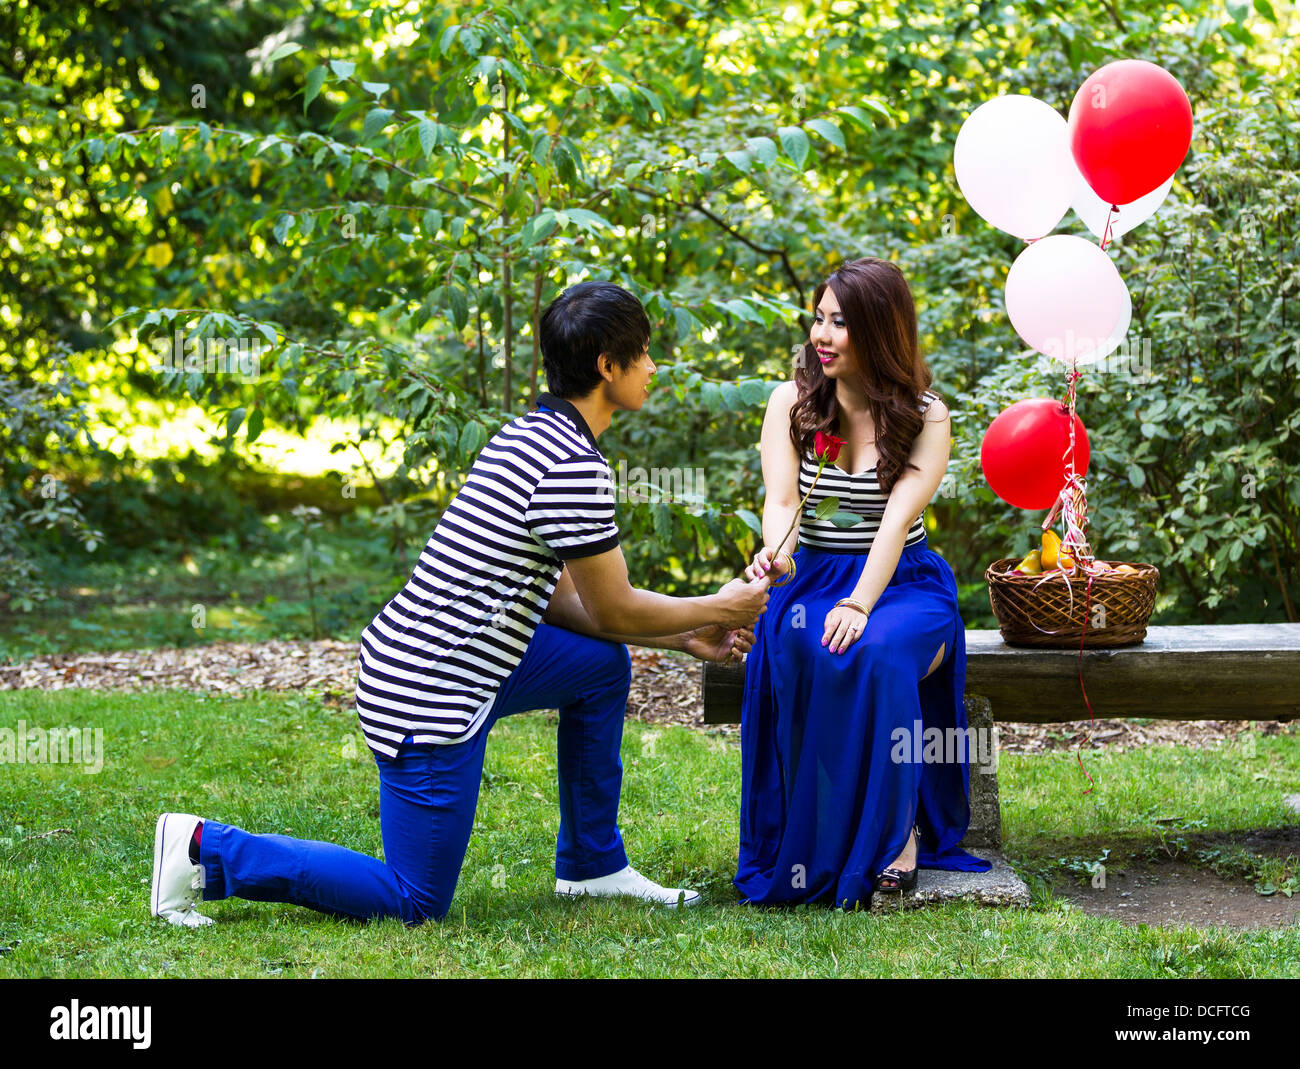 Horizontal photo of young adult man, on one knee with single red rose, proposing to his lady with balloons, basket of fruit Stock Photo